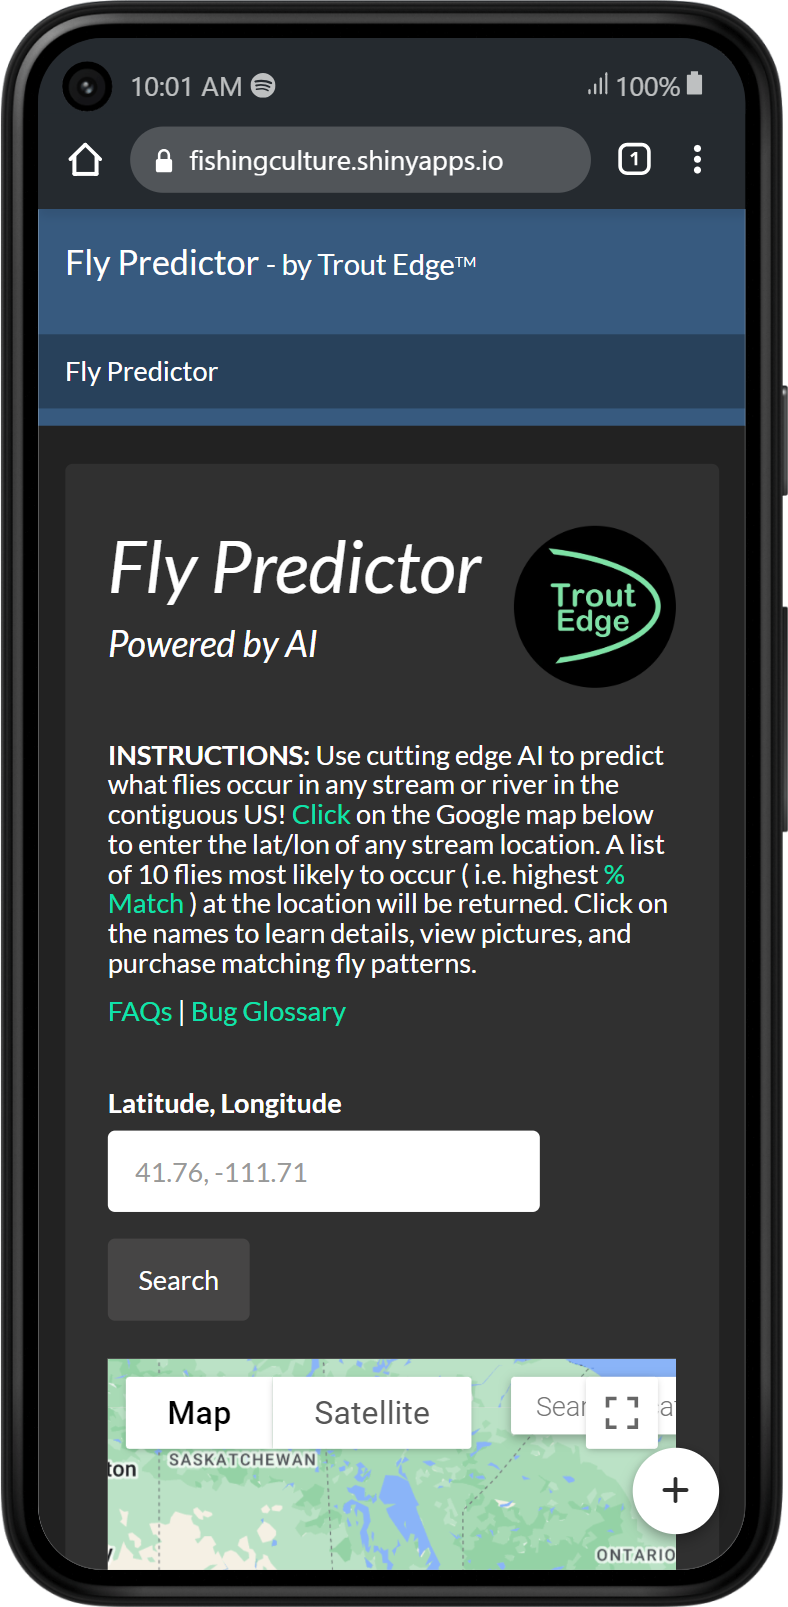 Fly Predictor home page